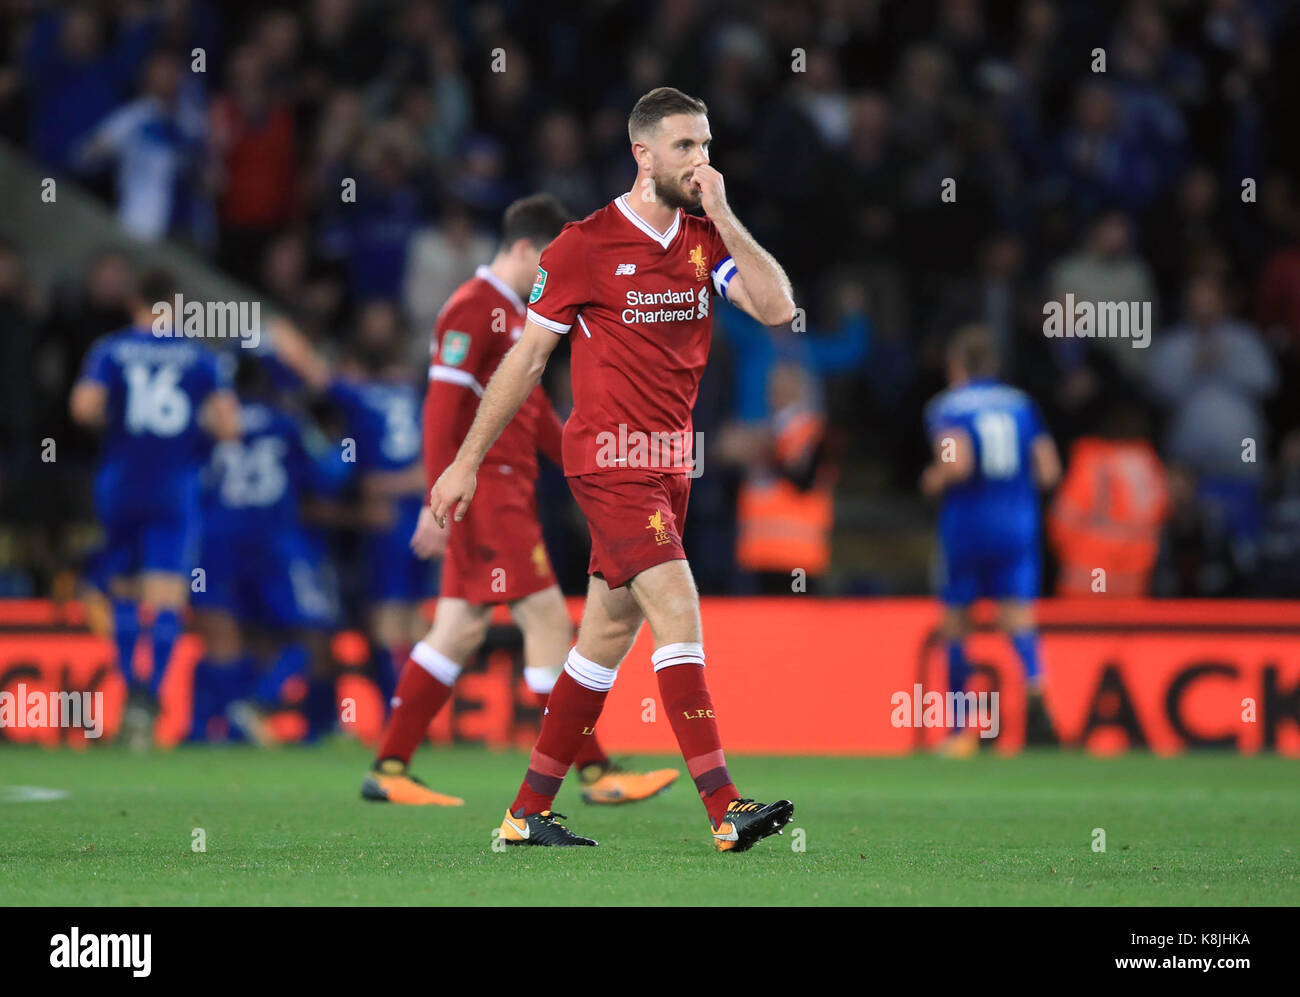 Liverpool S Jordan Henderson Stands Dejected As Leicester City S Shinji Okazaki Background Celebrates Scoring His Side S First Goal Of The Game With Team Mates During The Carabao Cup Third Round Match At The King